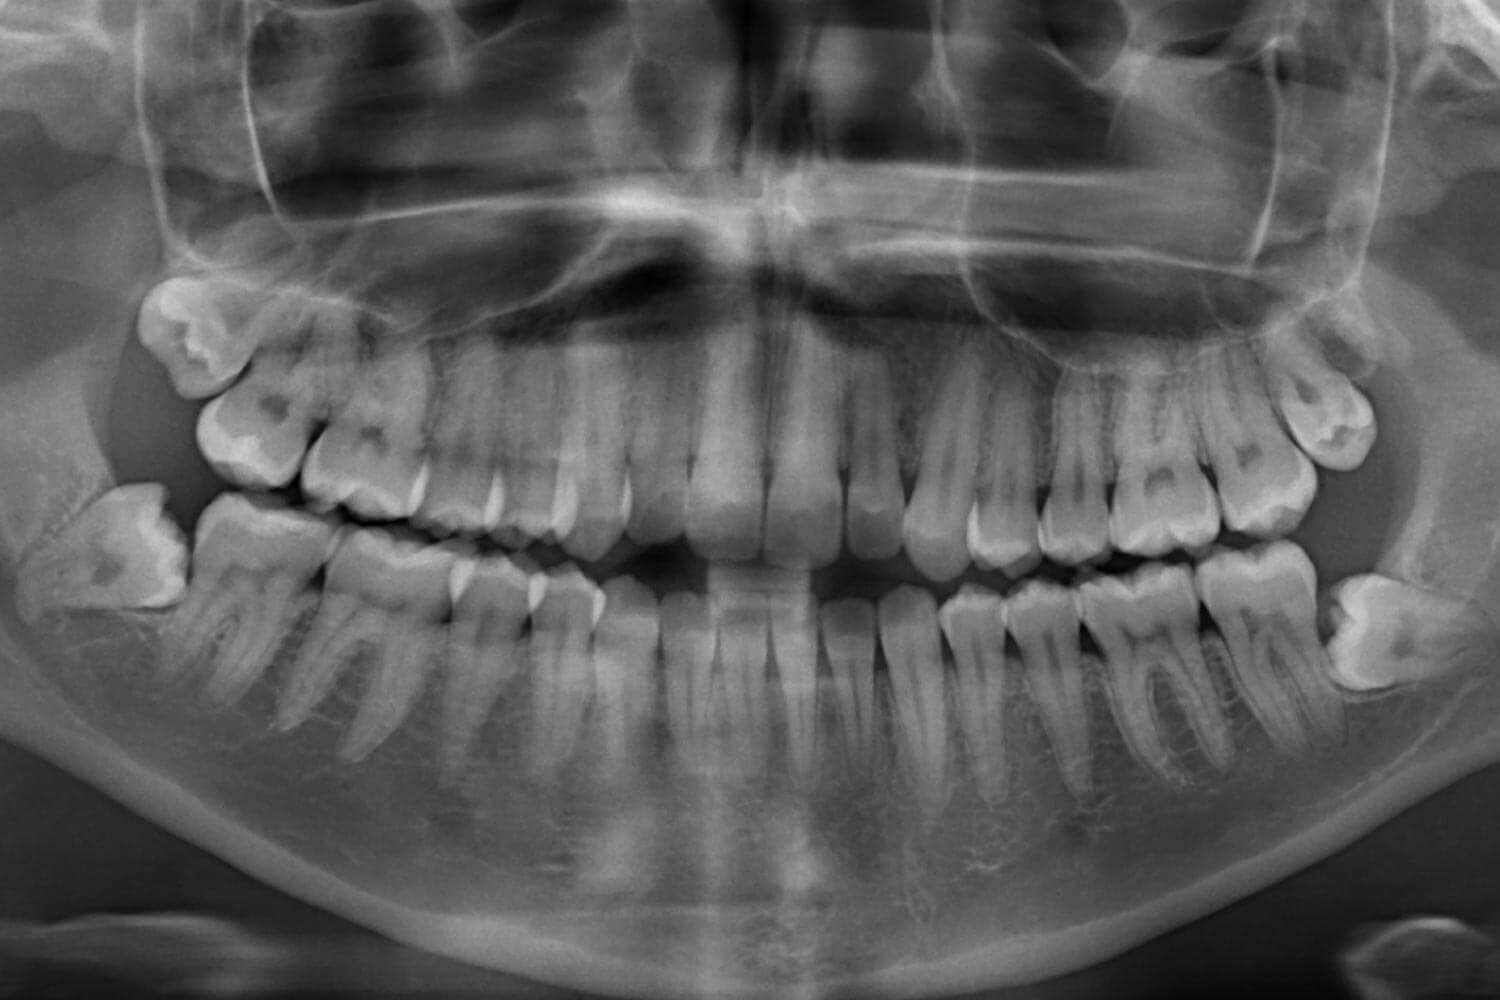 Black and white panoramic X-ray showing 4 wisdom teeth that need removal